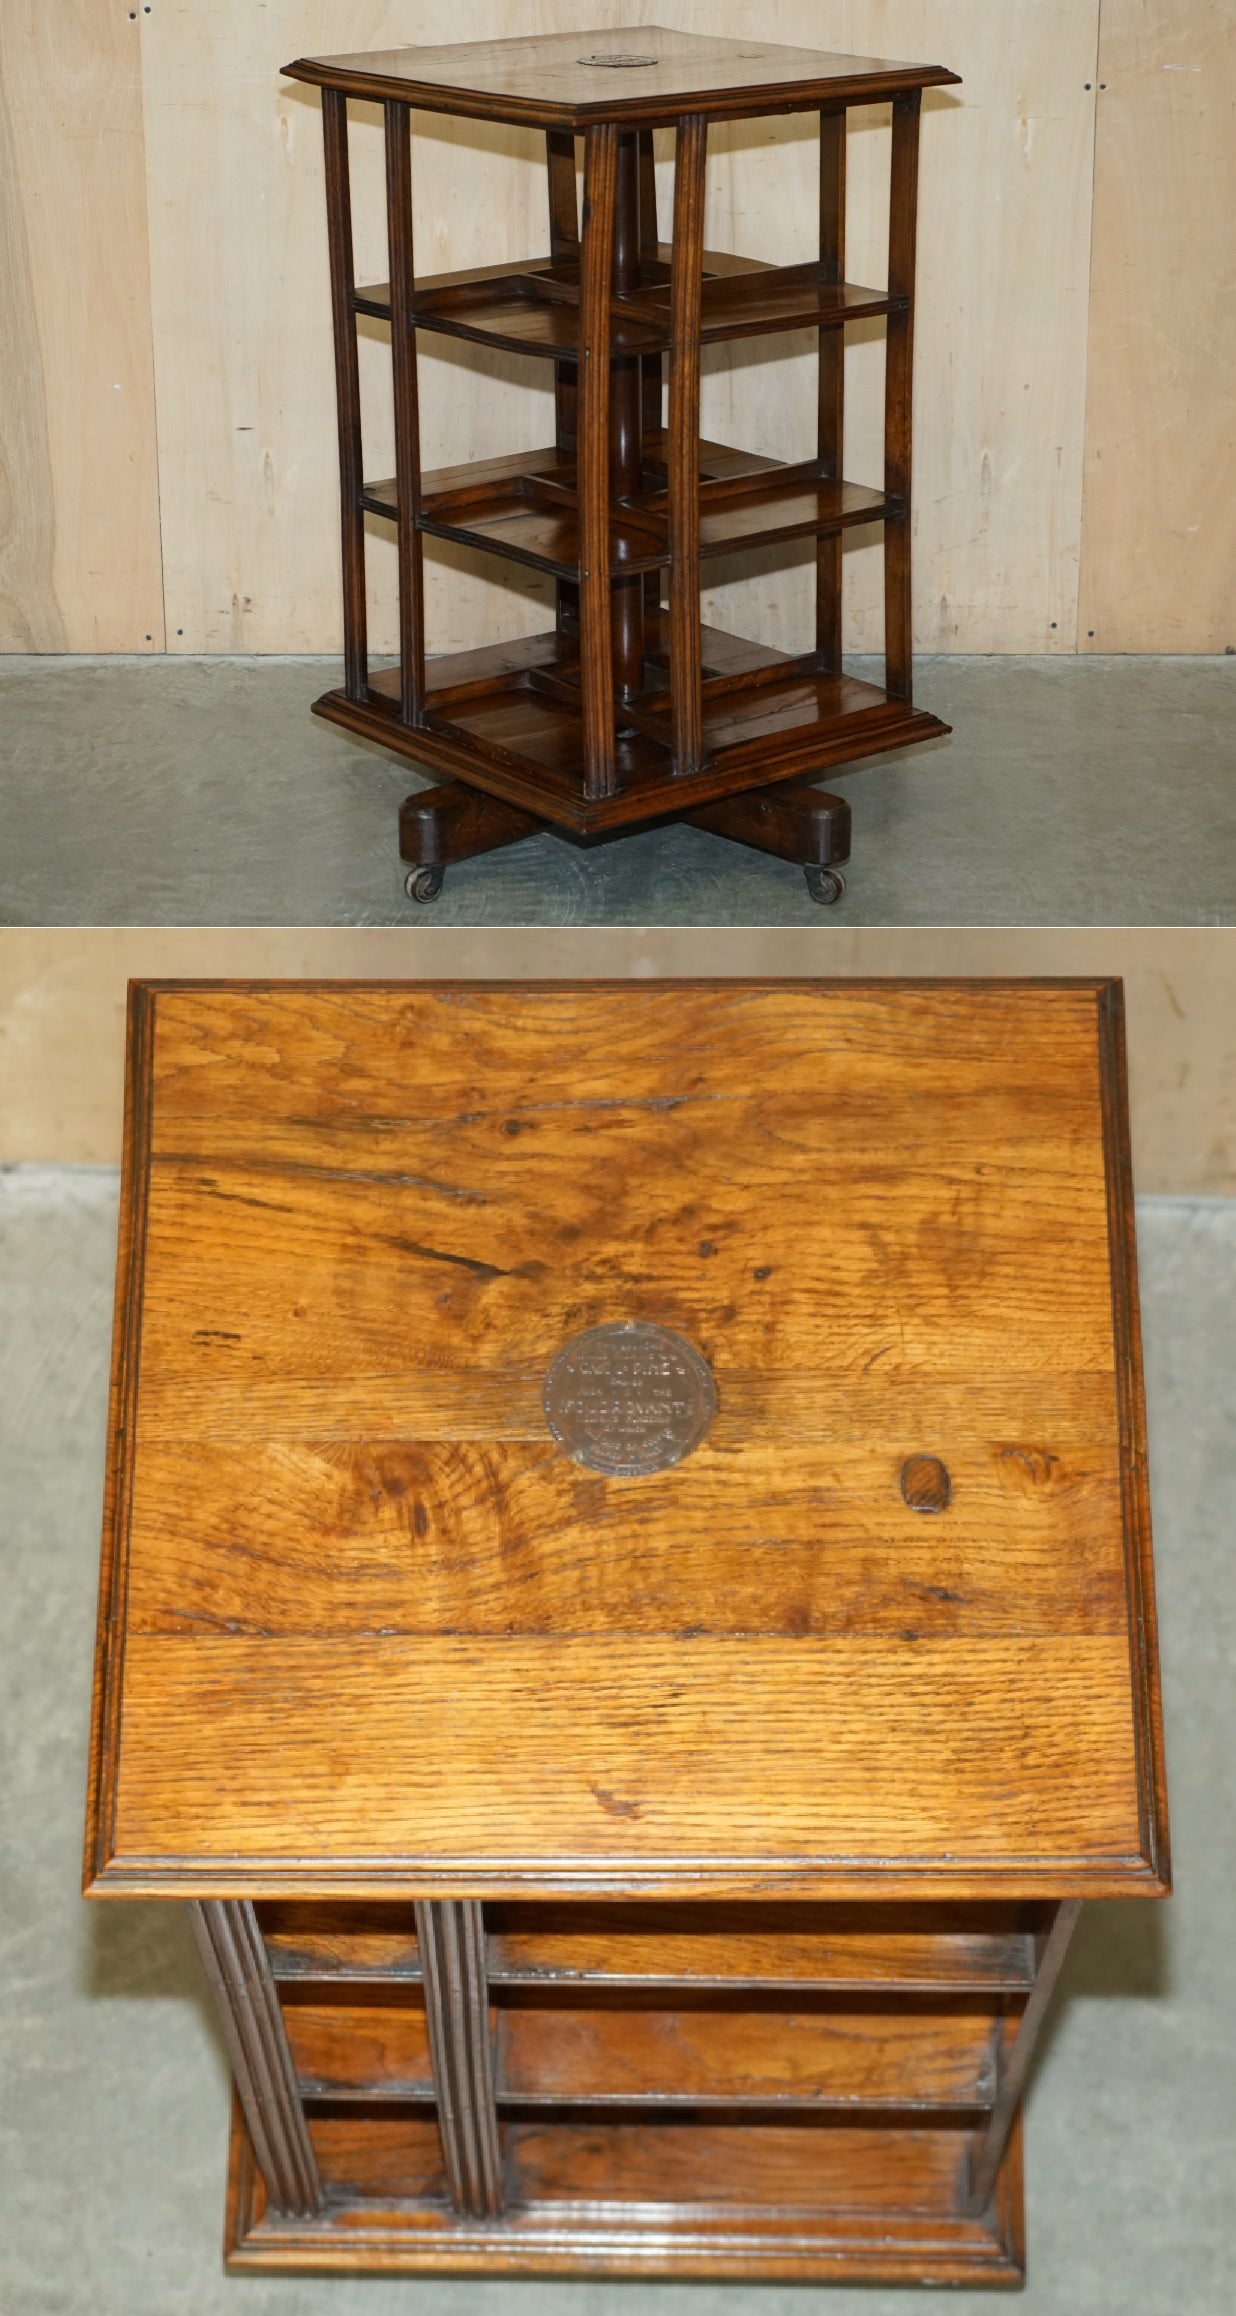 Royal House Antiques

Royal House Antiques is delighted to offer for sale this super rare Revolving bookcase table with was crafted from Reclaimed oak from Lord Nelson's flagship boat HMS Foudroyant 

Please note the delivery fee listed is just a